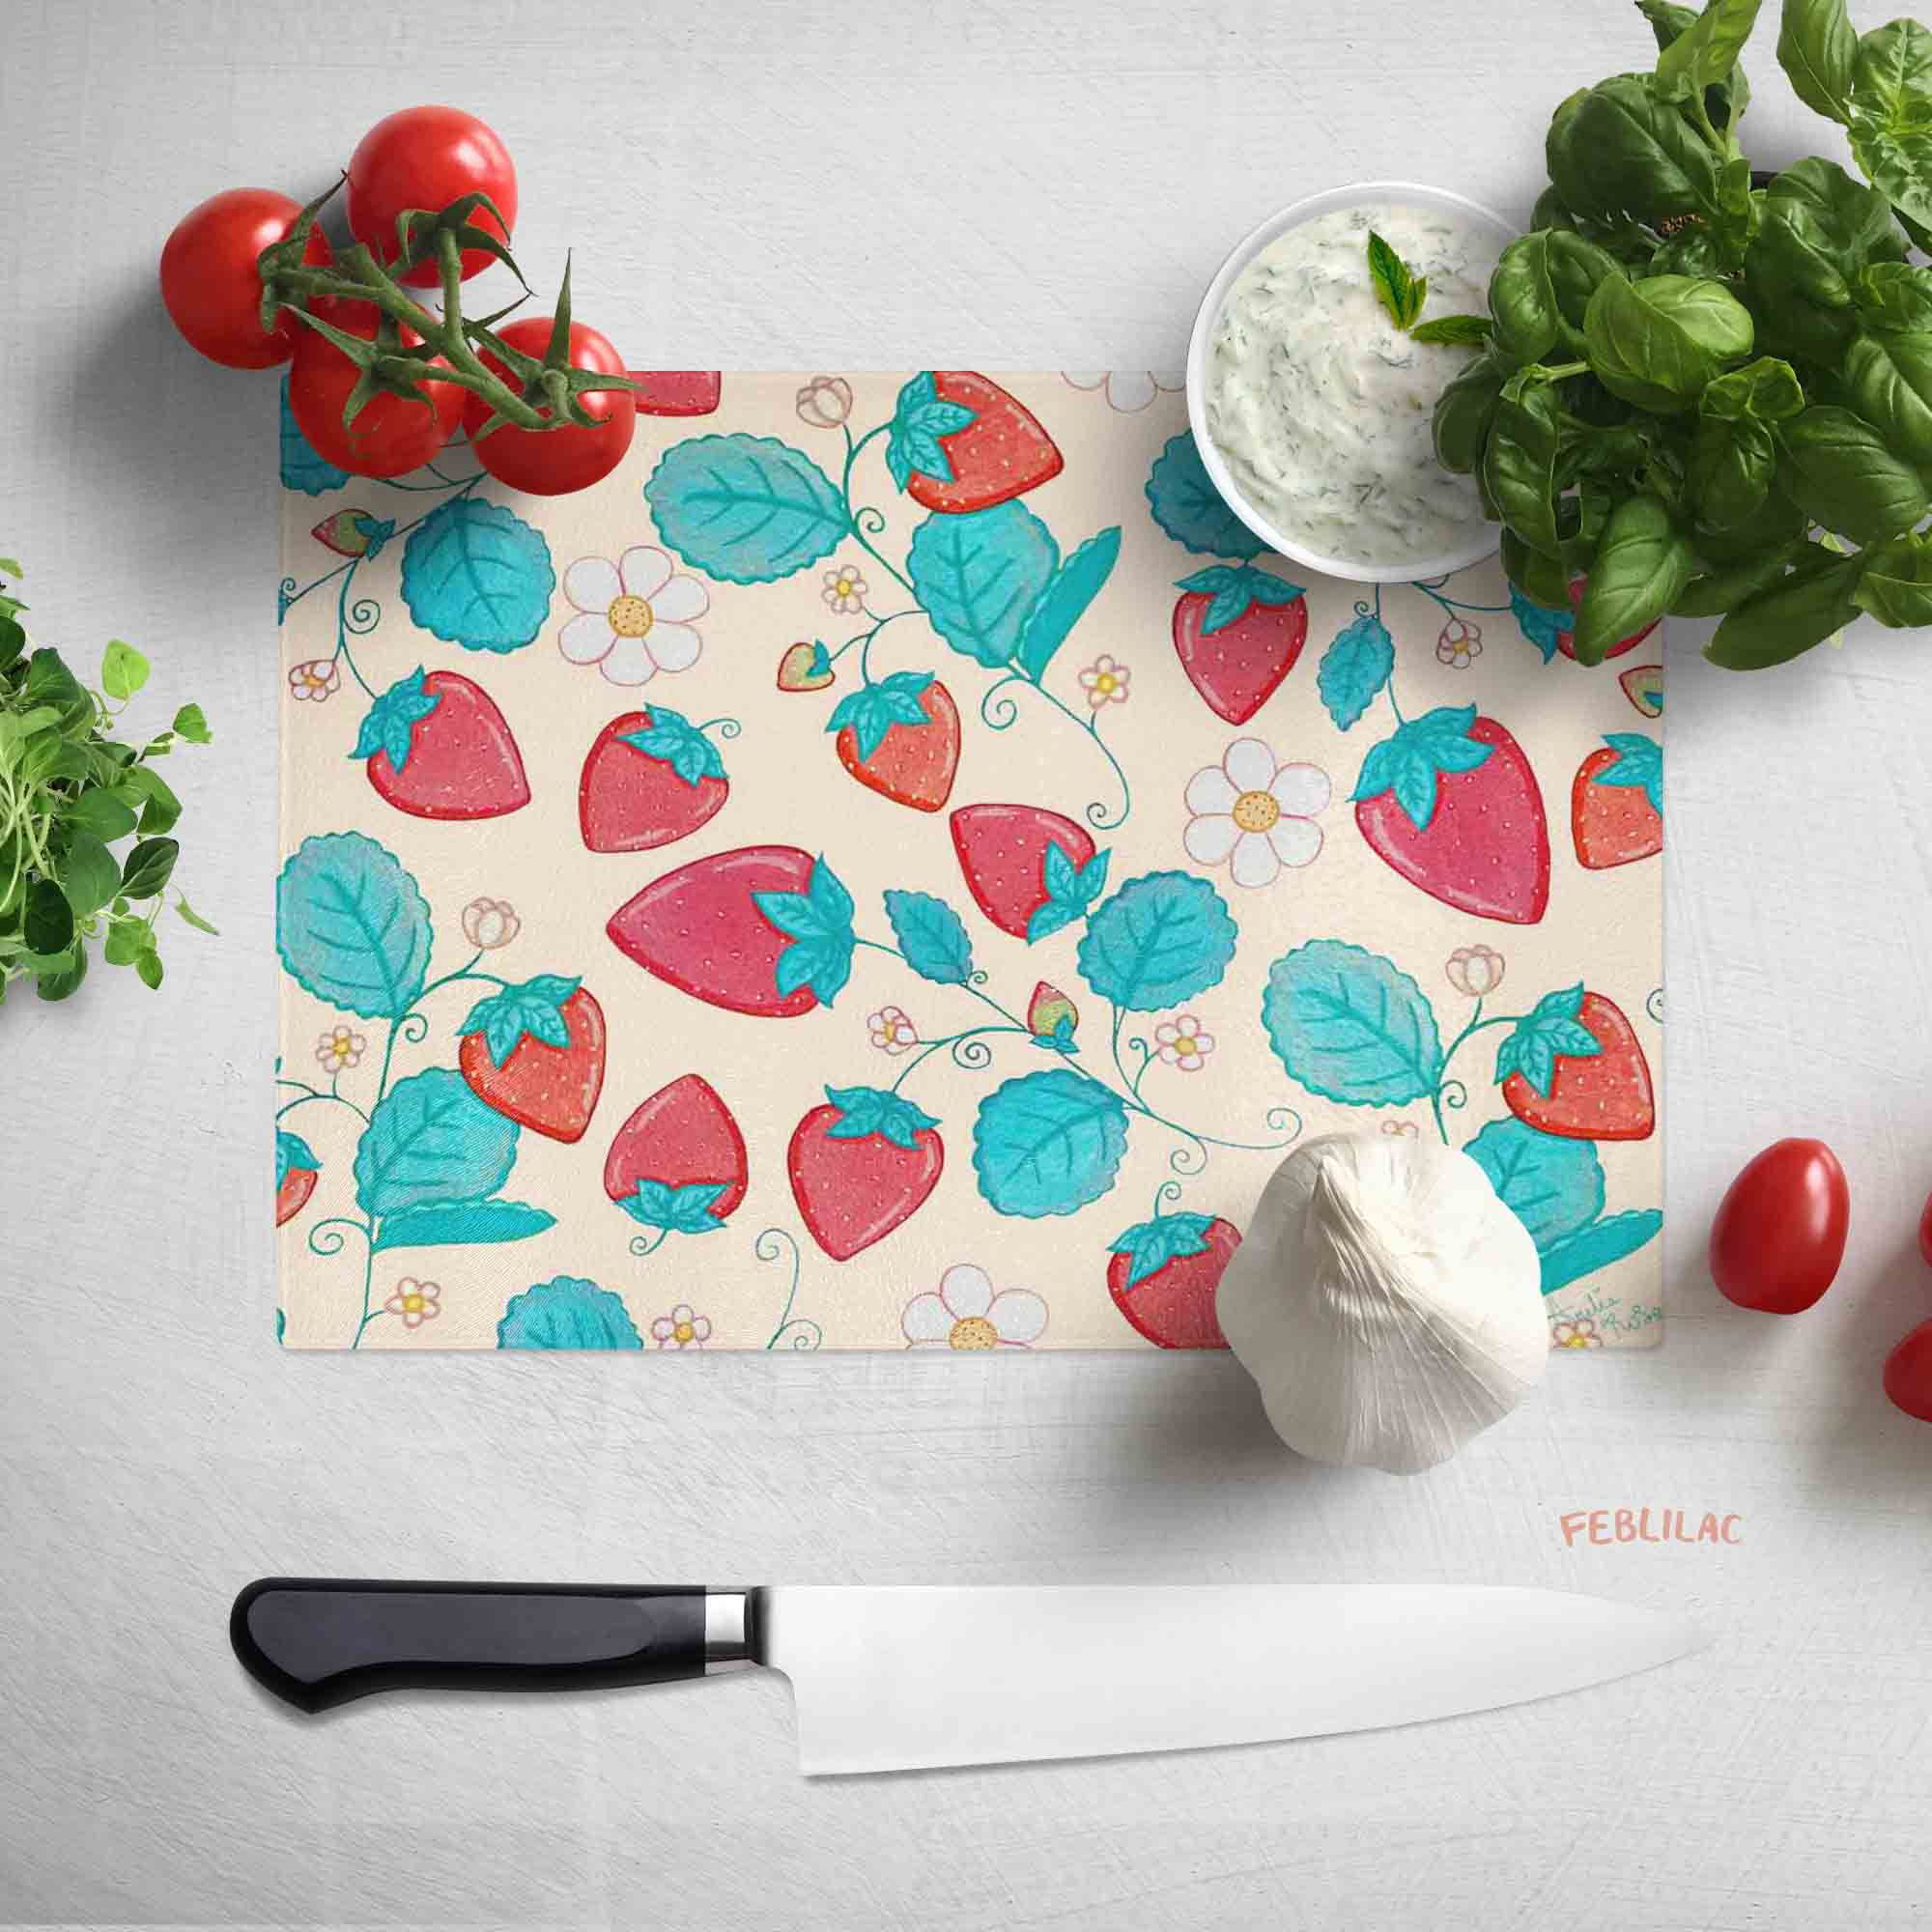 Feblilac Strawberries and Cream Cup and Dish Placemat by AmeliaRose Illustrations from UK